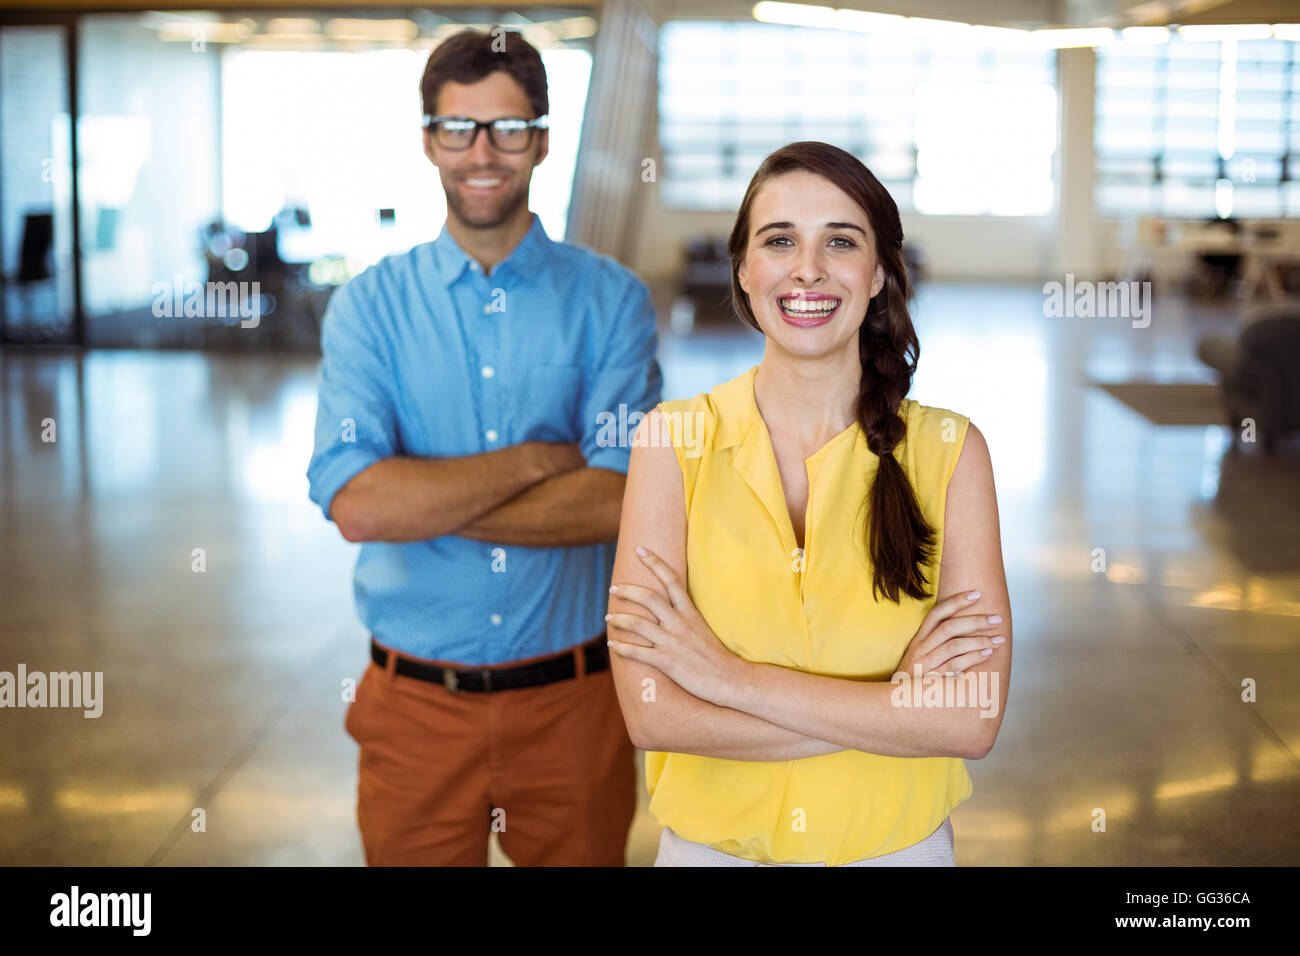 Business executive and co-worker standing with arms crossed Stock Photo